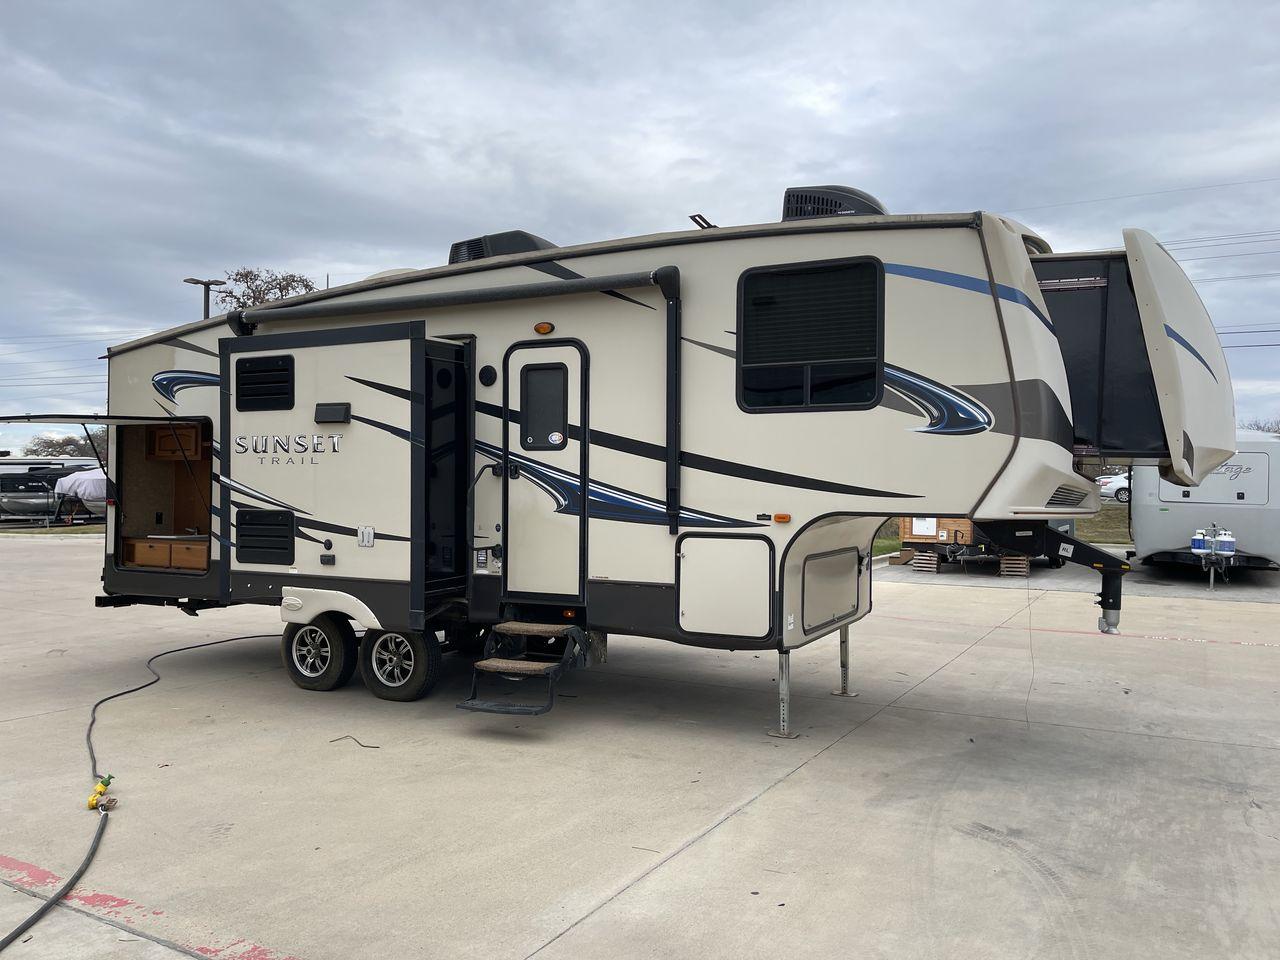 2015 CROSSROADS SUNSET TRAIL RESERVE (4V0FC2624FB) , Length: 30.17 ft | Dry Weight: 6,401 lbs | Gross Weight: 9,542 lbs | Slides: 2 transmission, located at 4319 N Main Street, Cleburne, TX, 76033, (817) 221-0660, 32.435829, -97.384178 - This model has the right mix of space and maneuverability, with a length of 30 feet and a dry weight of 6,401 pounds. With a strong aluminum frame and fiberglass sidewalls, it will last for a long time on the road, making it a great choice for travelers who want both style and dependability. The Sun - Photo #23